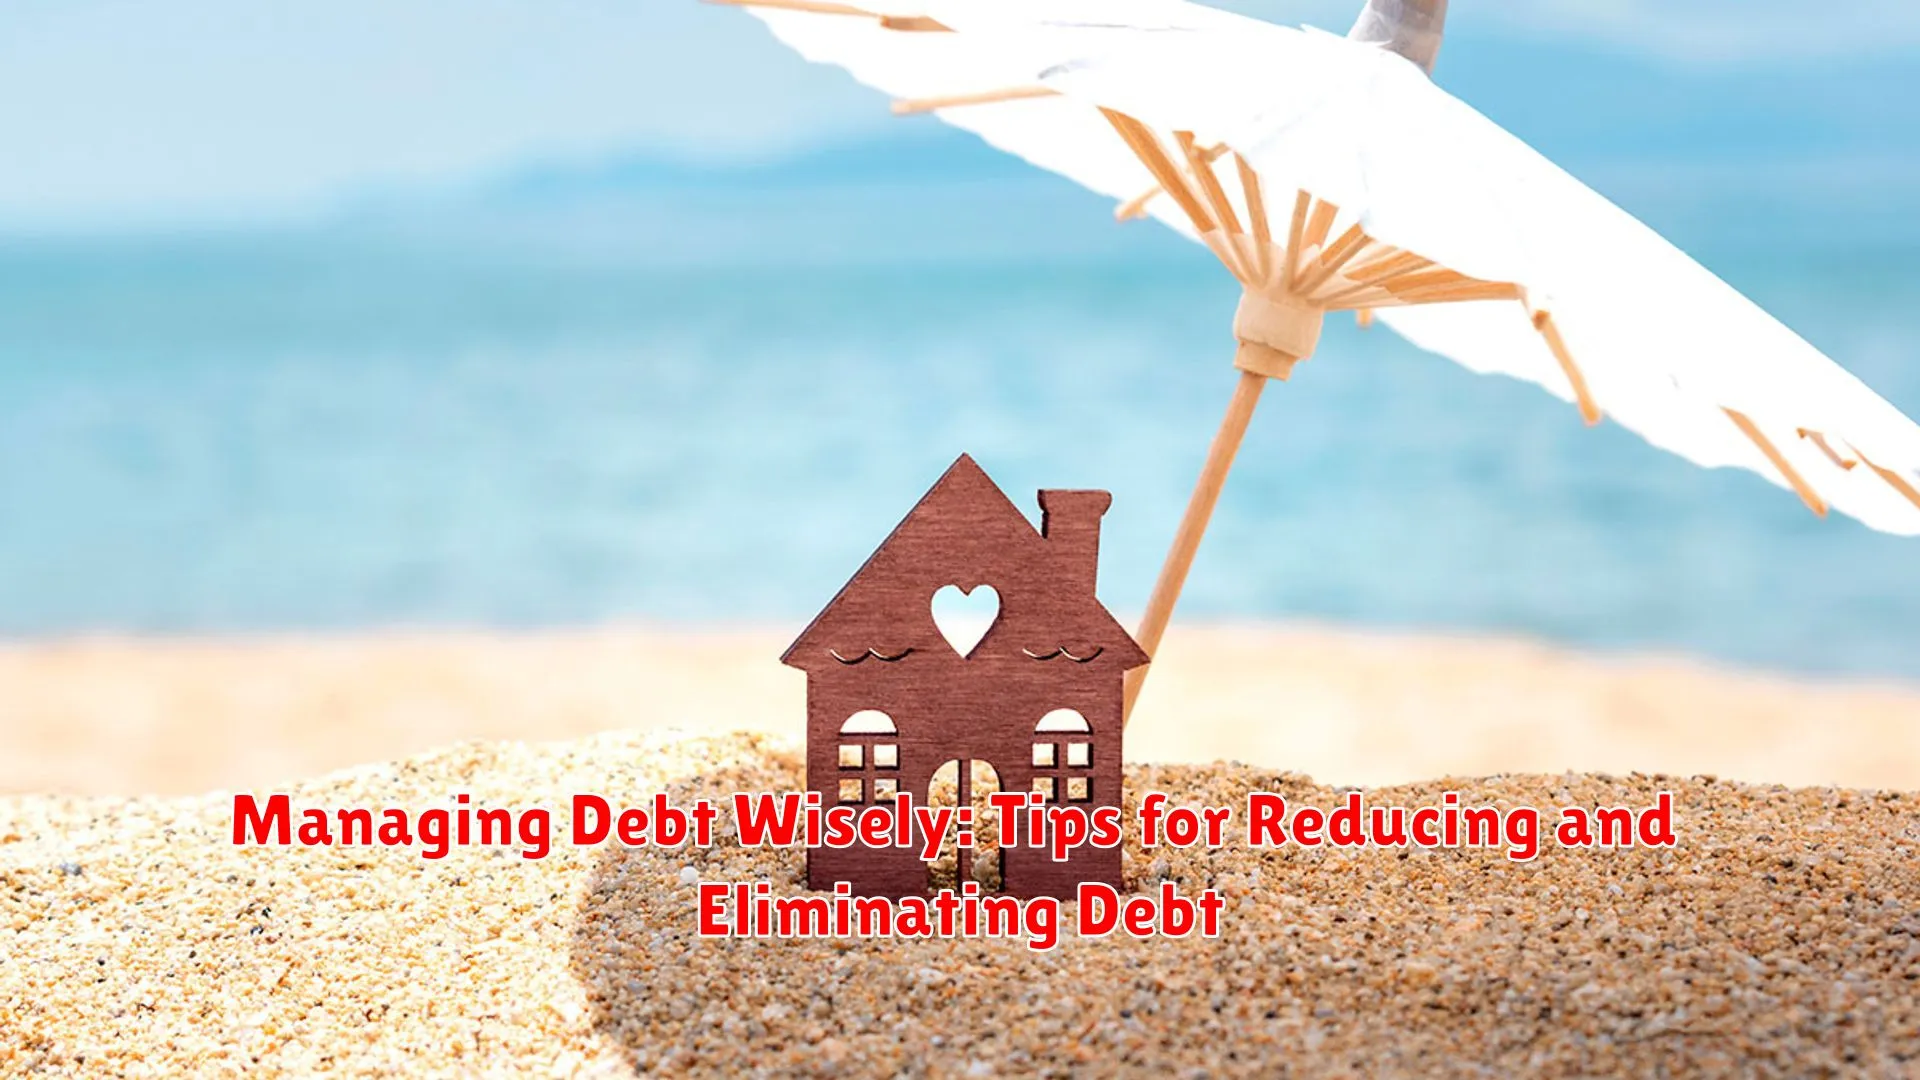 Managing Debt Wisely: Tips for Reducing and Eliminating Debt